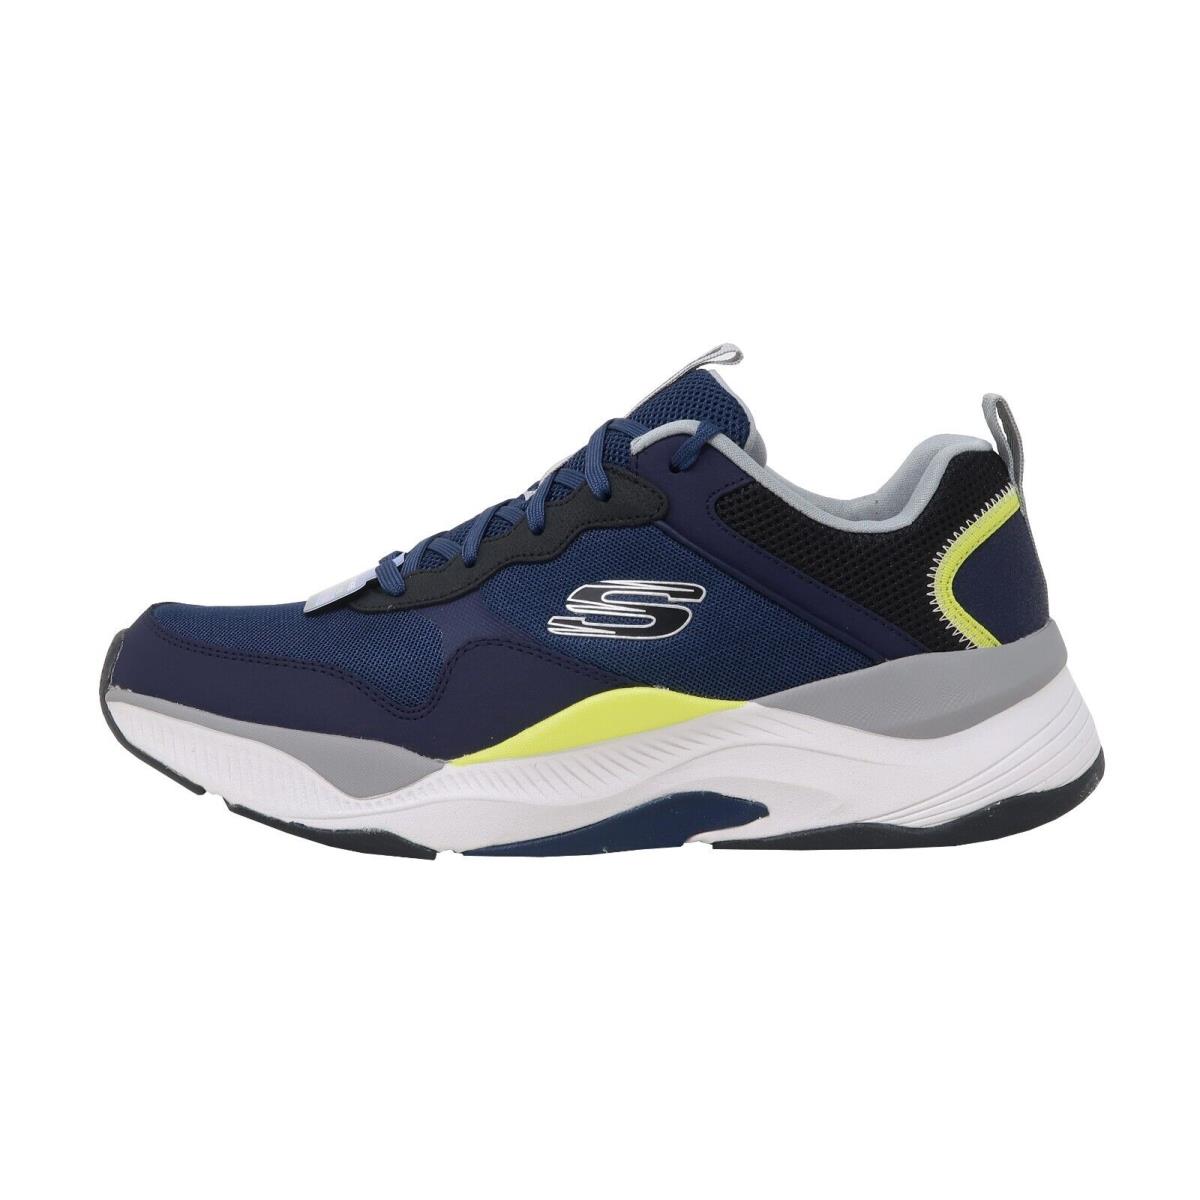 Skechers Mira Synthetic Leather Nylon Mesh Navy Blue Gray Sneakers Men Shoes